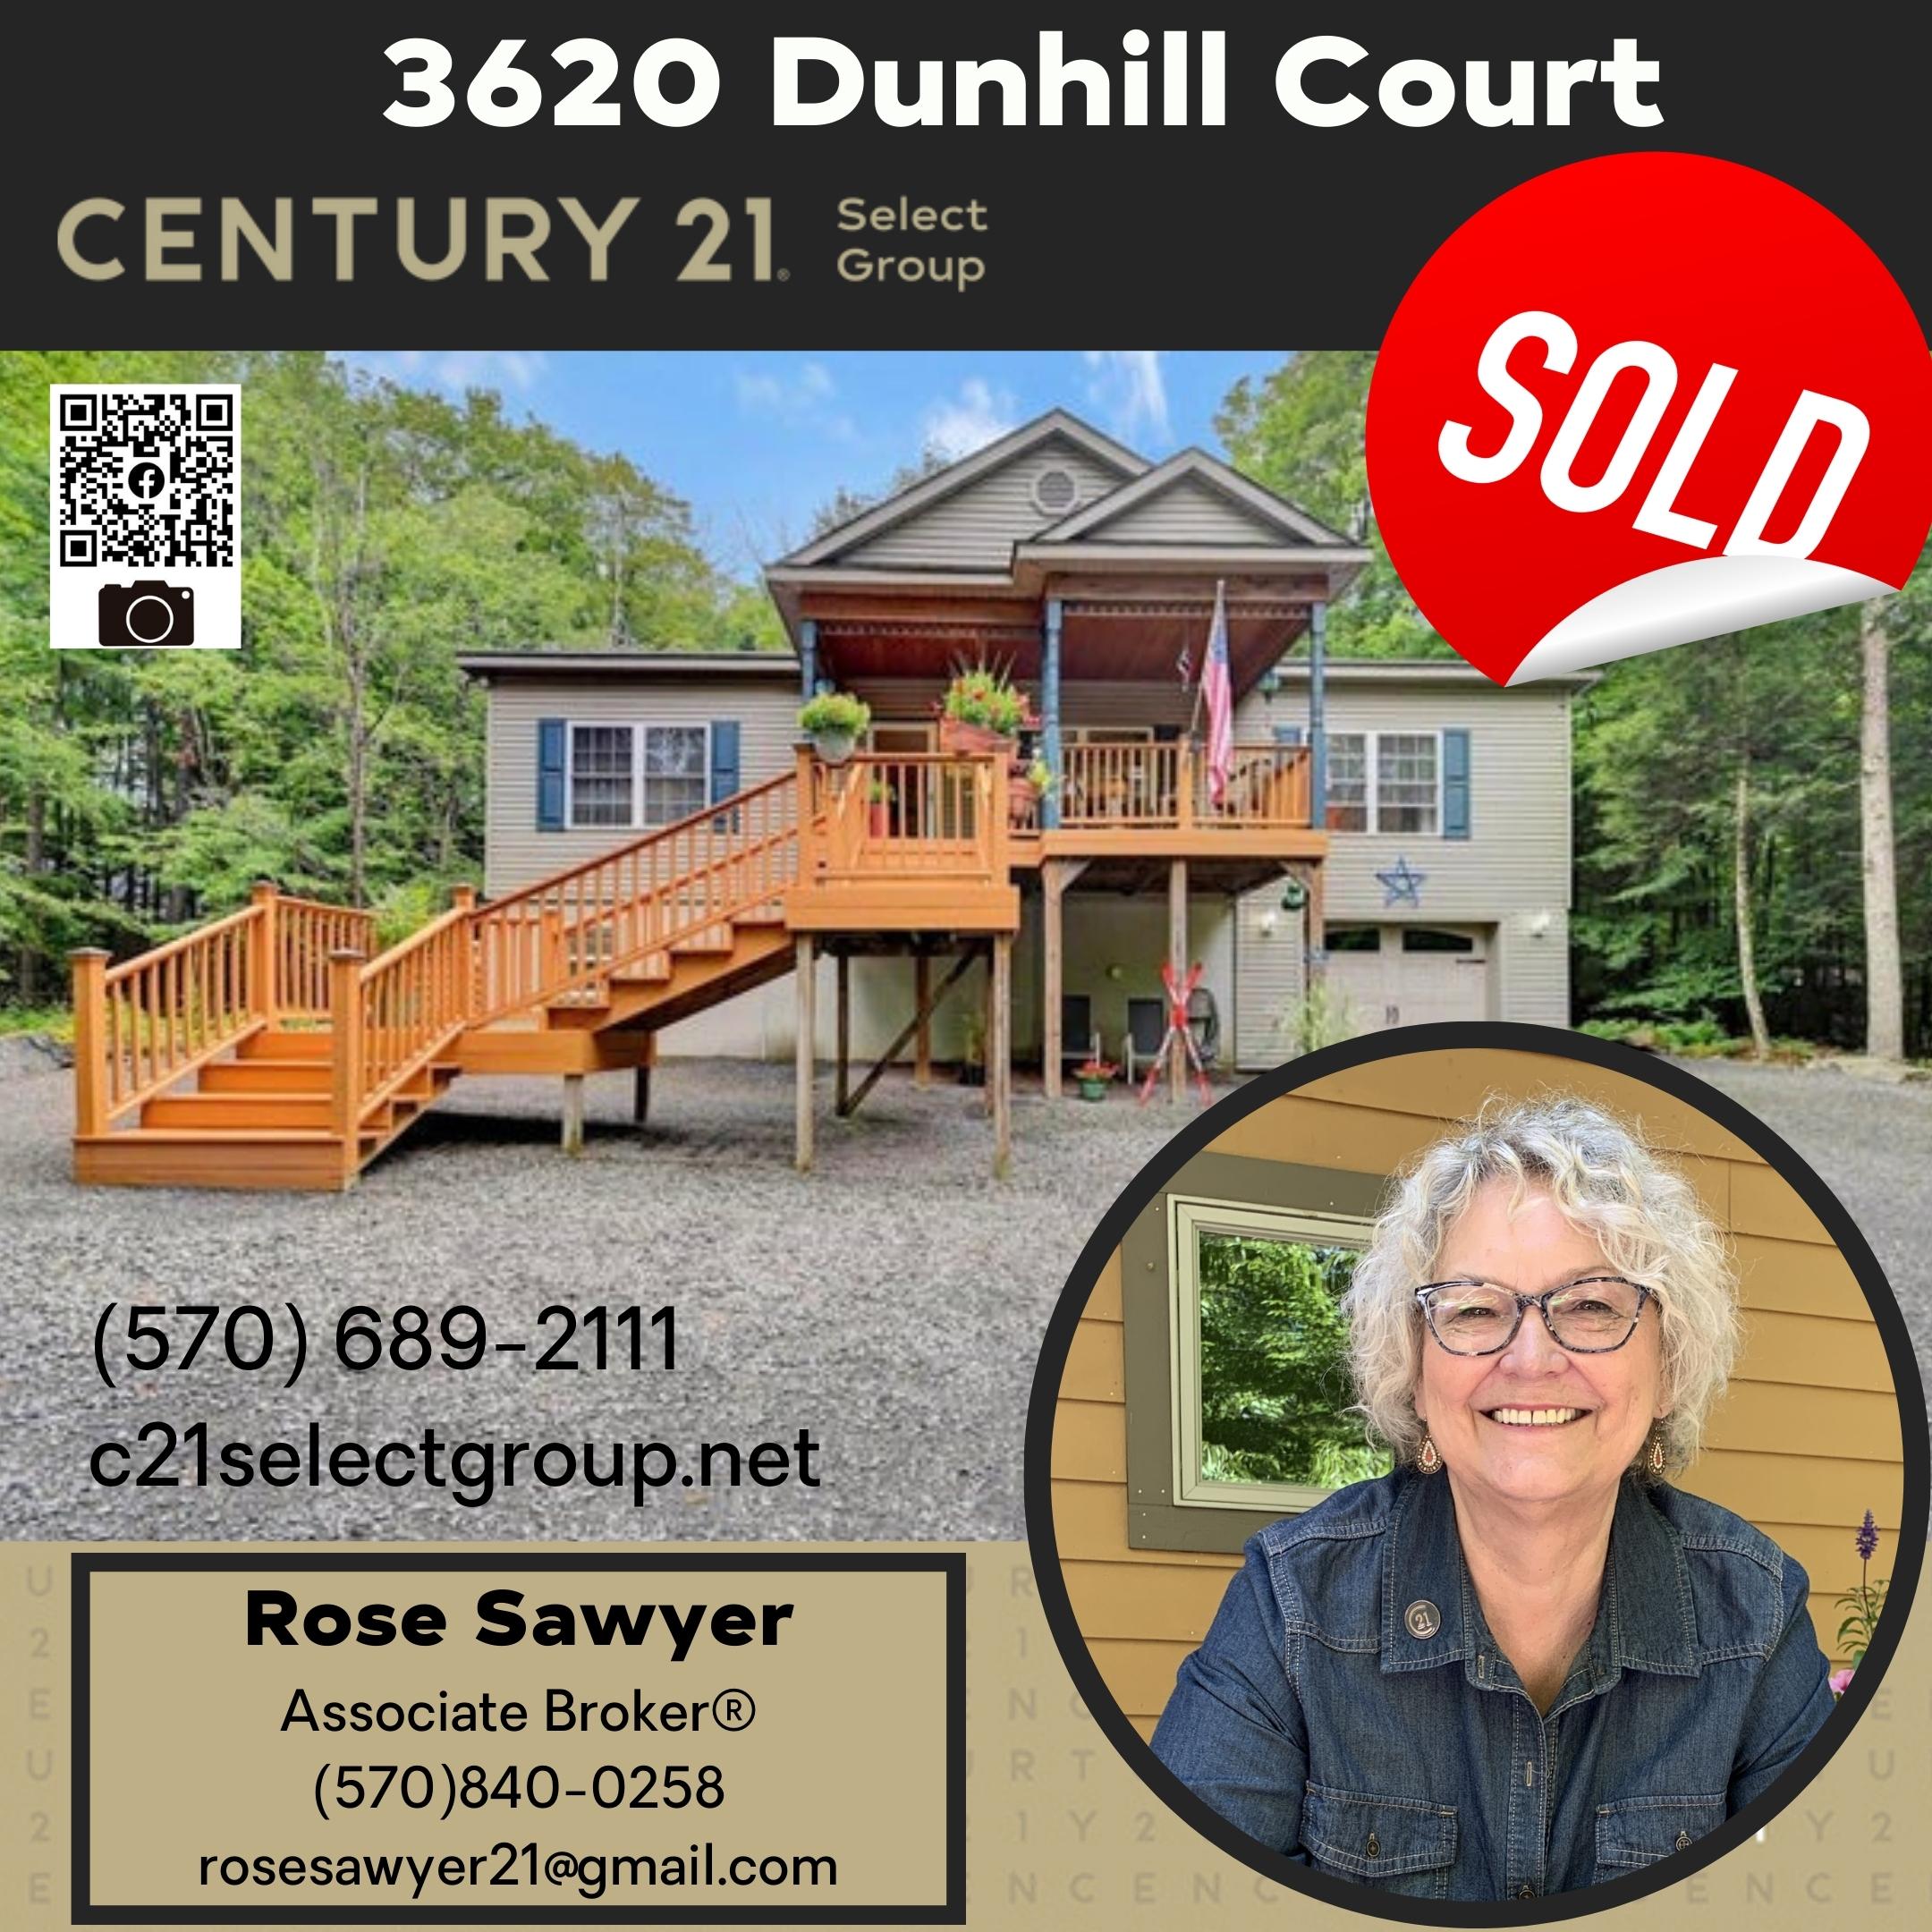 SOLD! 3620 Dunhill Court: The Hideout